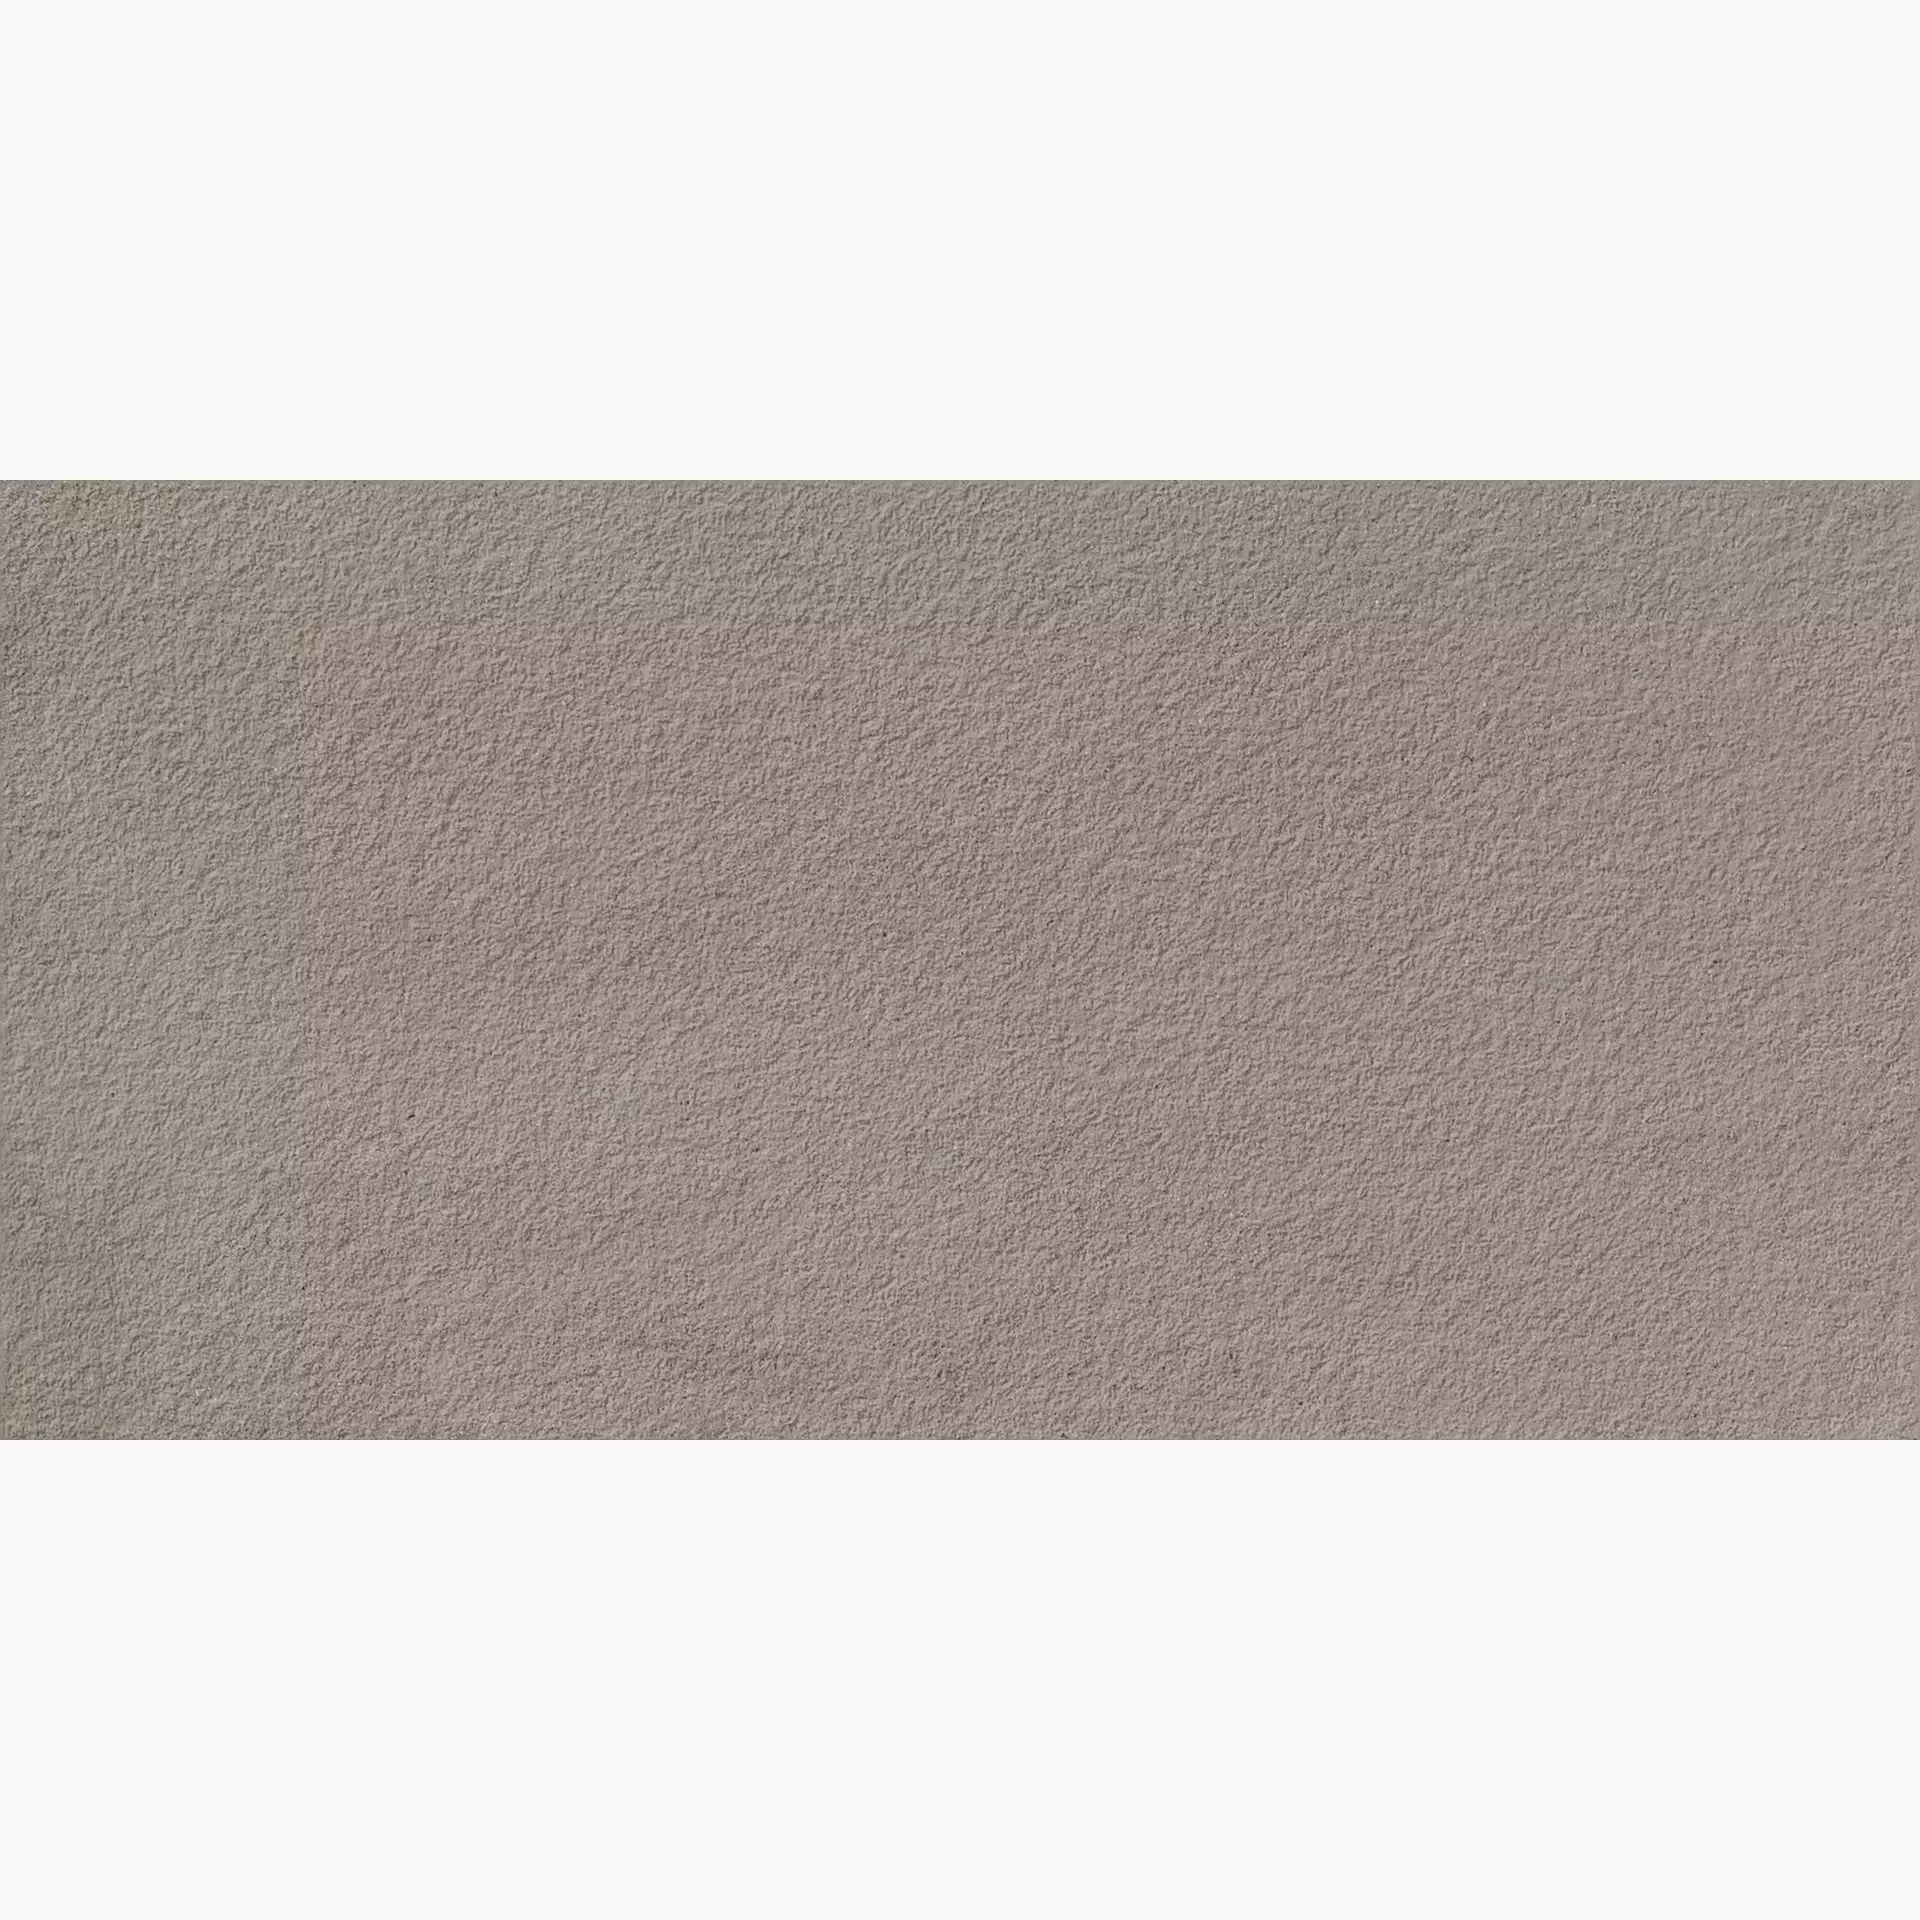 Marazzi Appeal Taupe Strutturato M0WX 30x60cm rectified 8,5mm